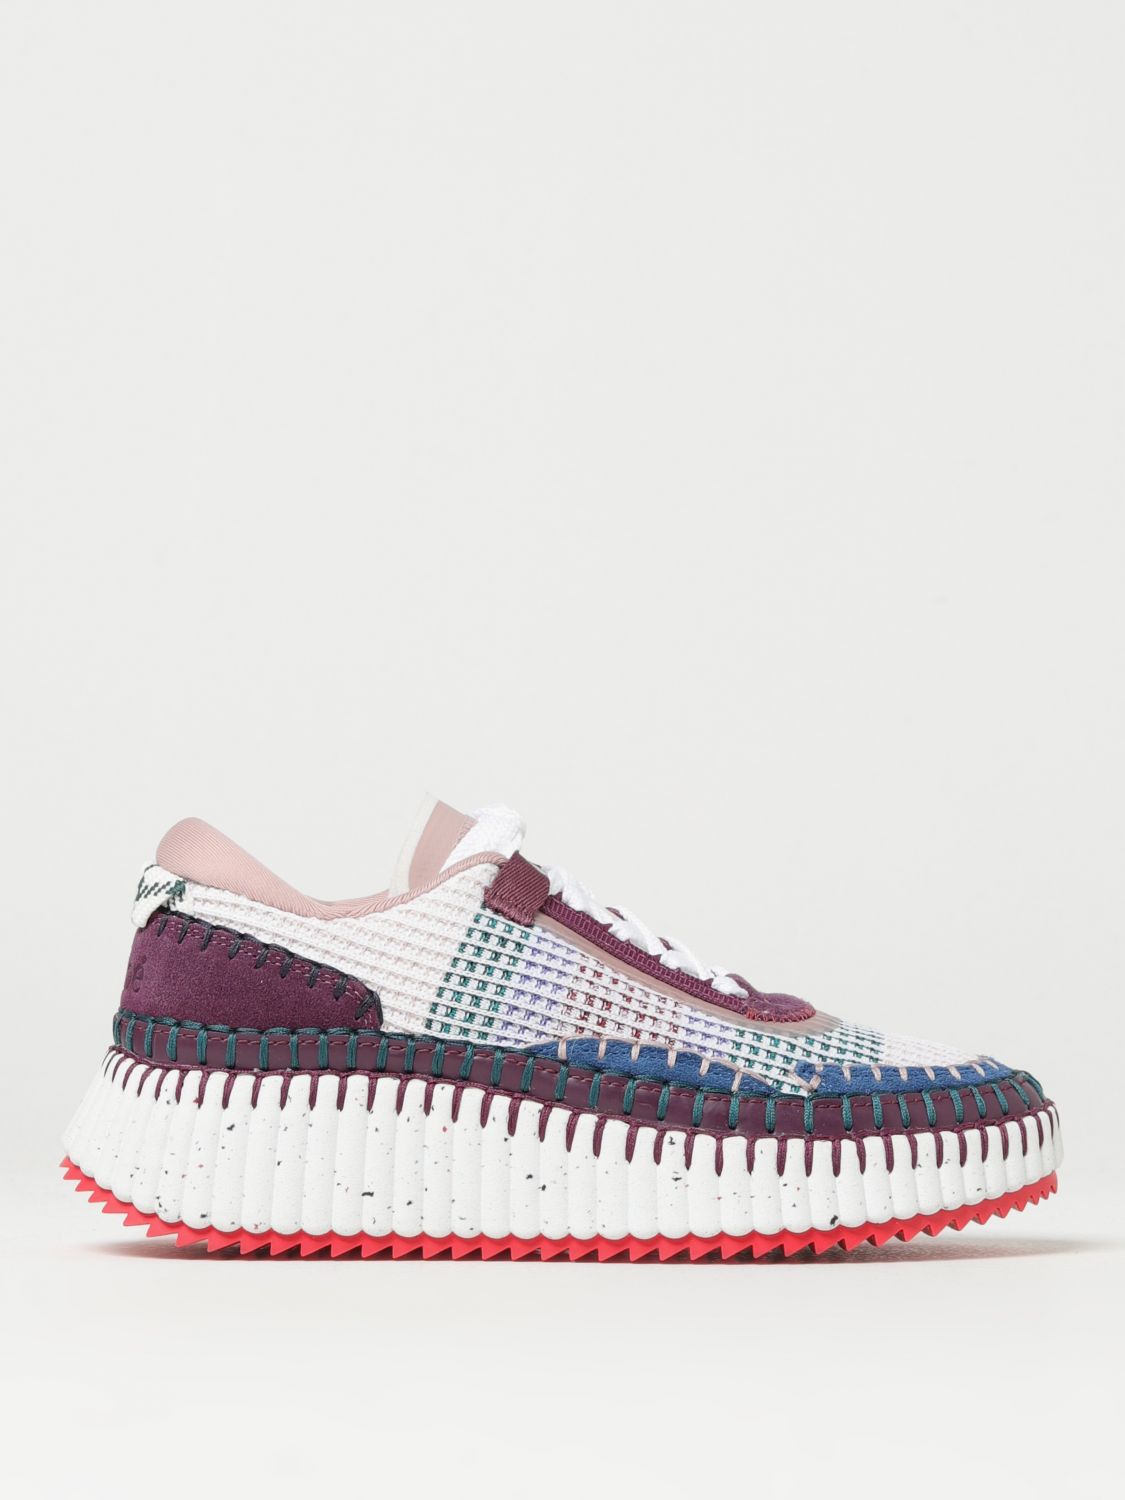 CHLOÉ NAMA SNEAKERS IN KNIT AND SUEDE,E44153019